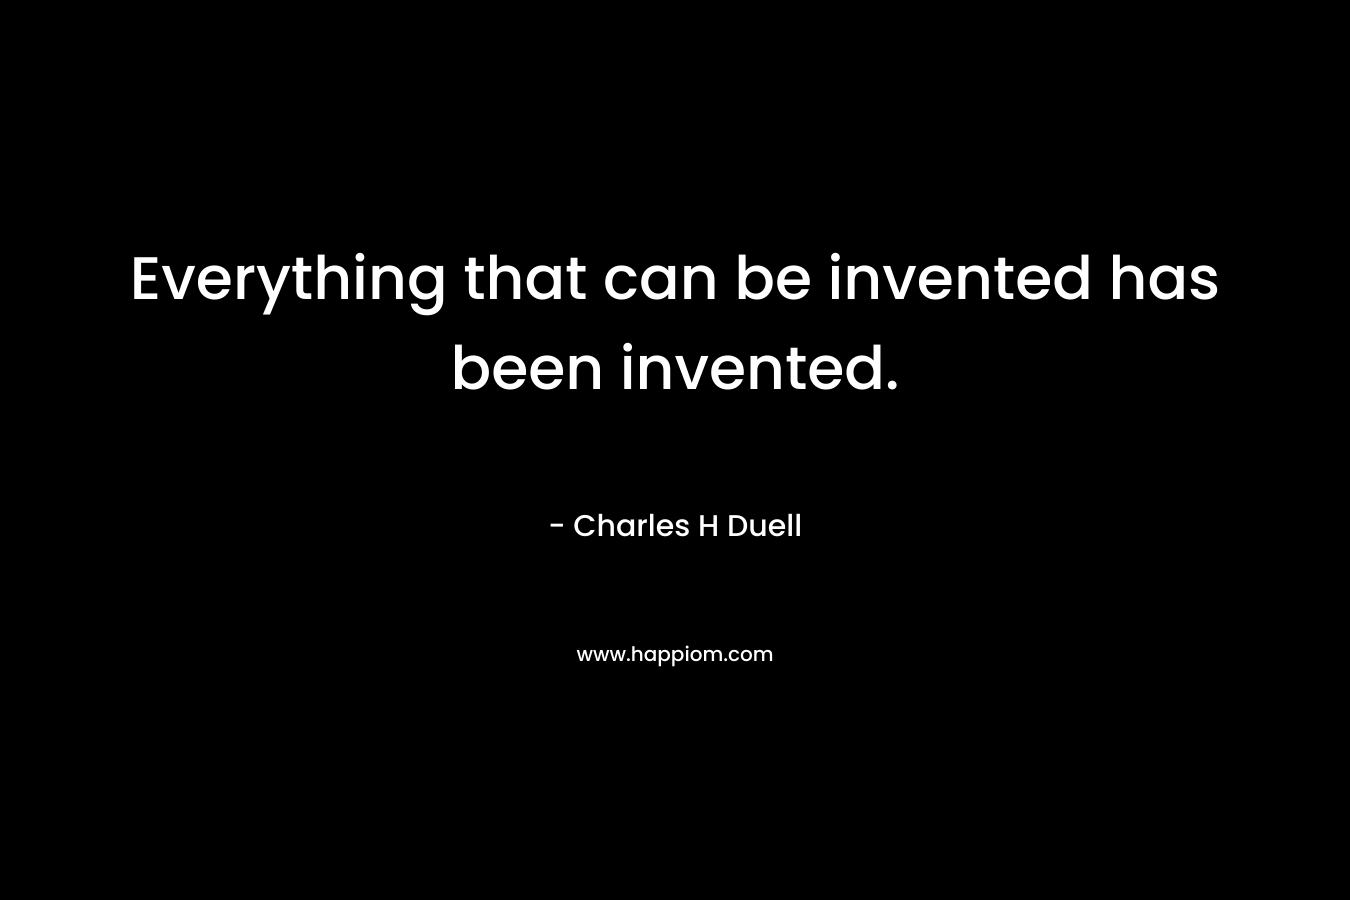 Everything that can be invented has been invented.